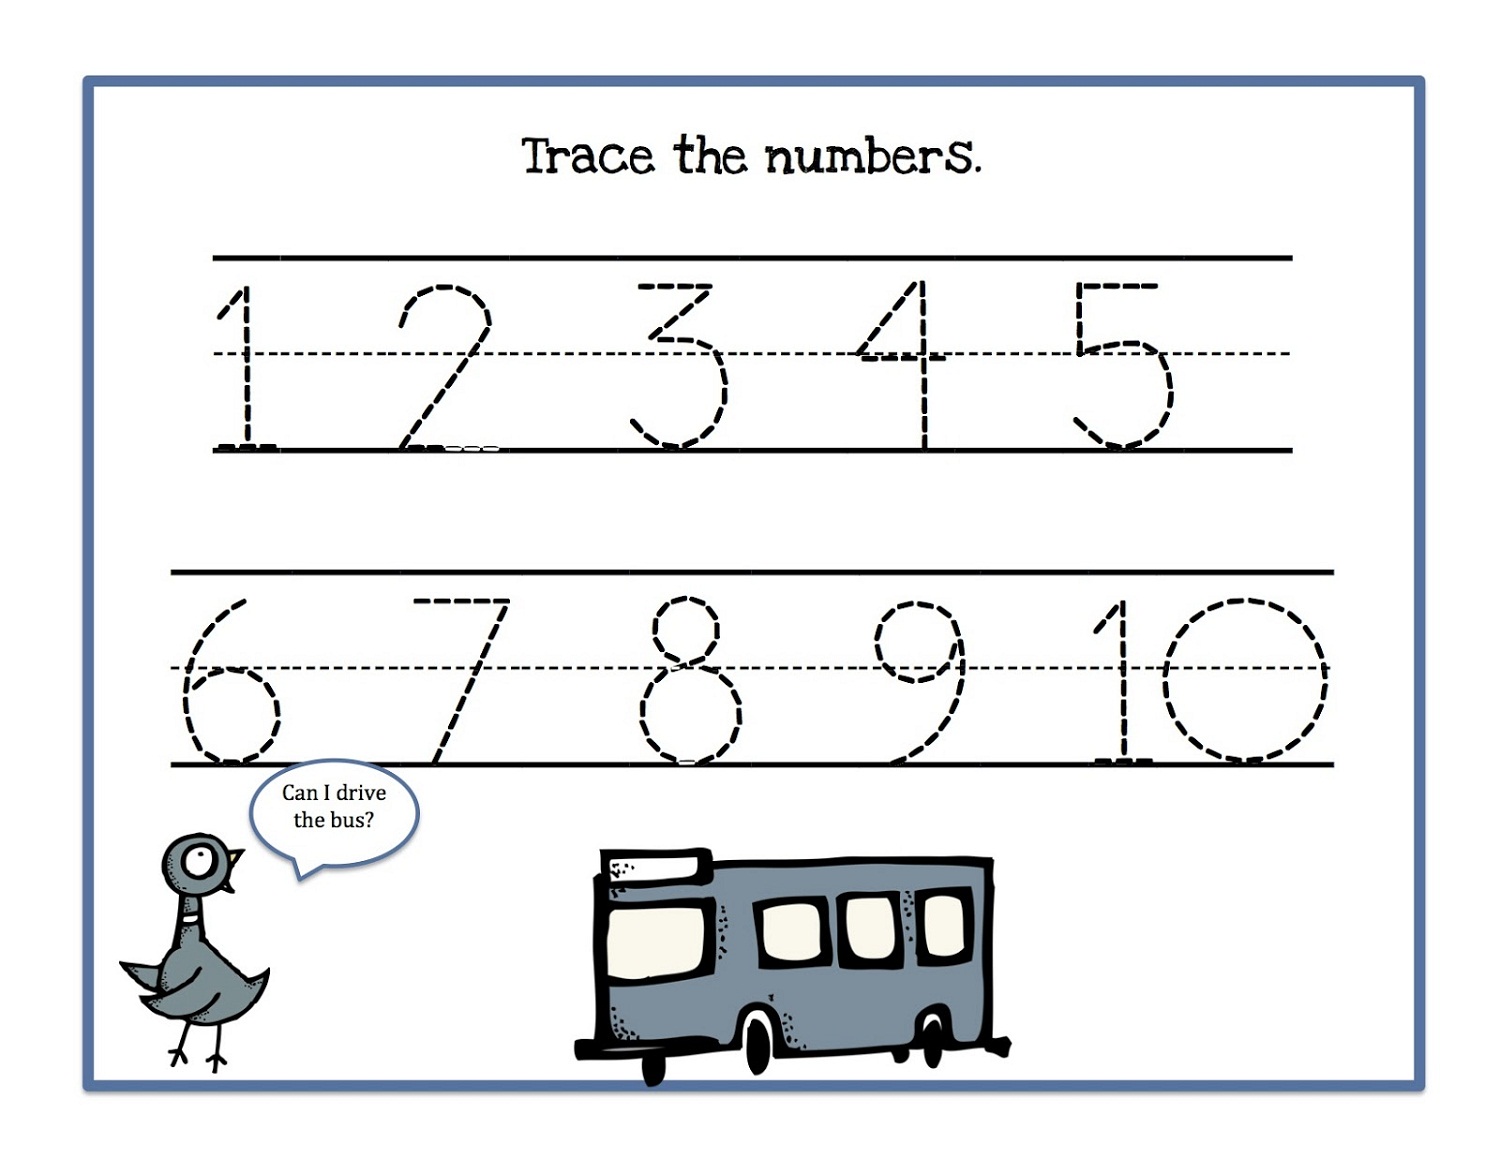 tracing-numbers-1-10-free-printable-get-your-hands-on-amazing-free-printables